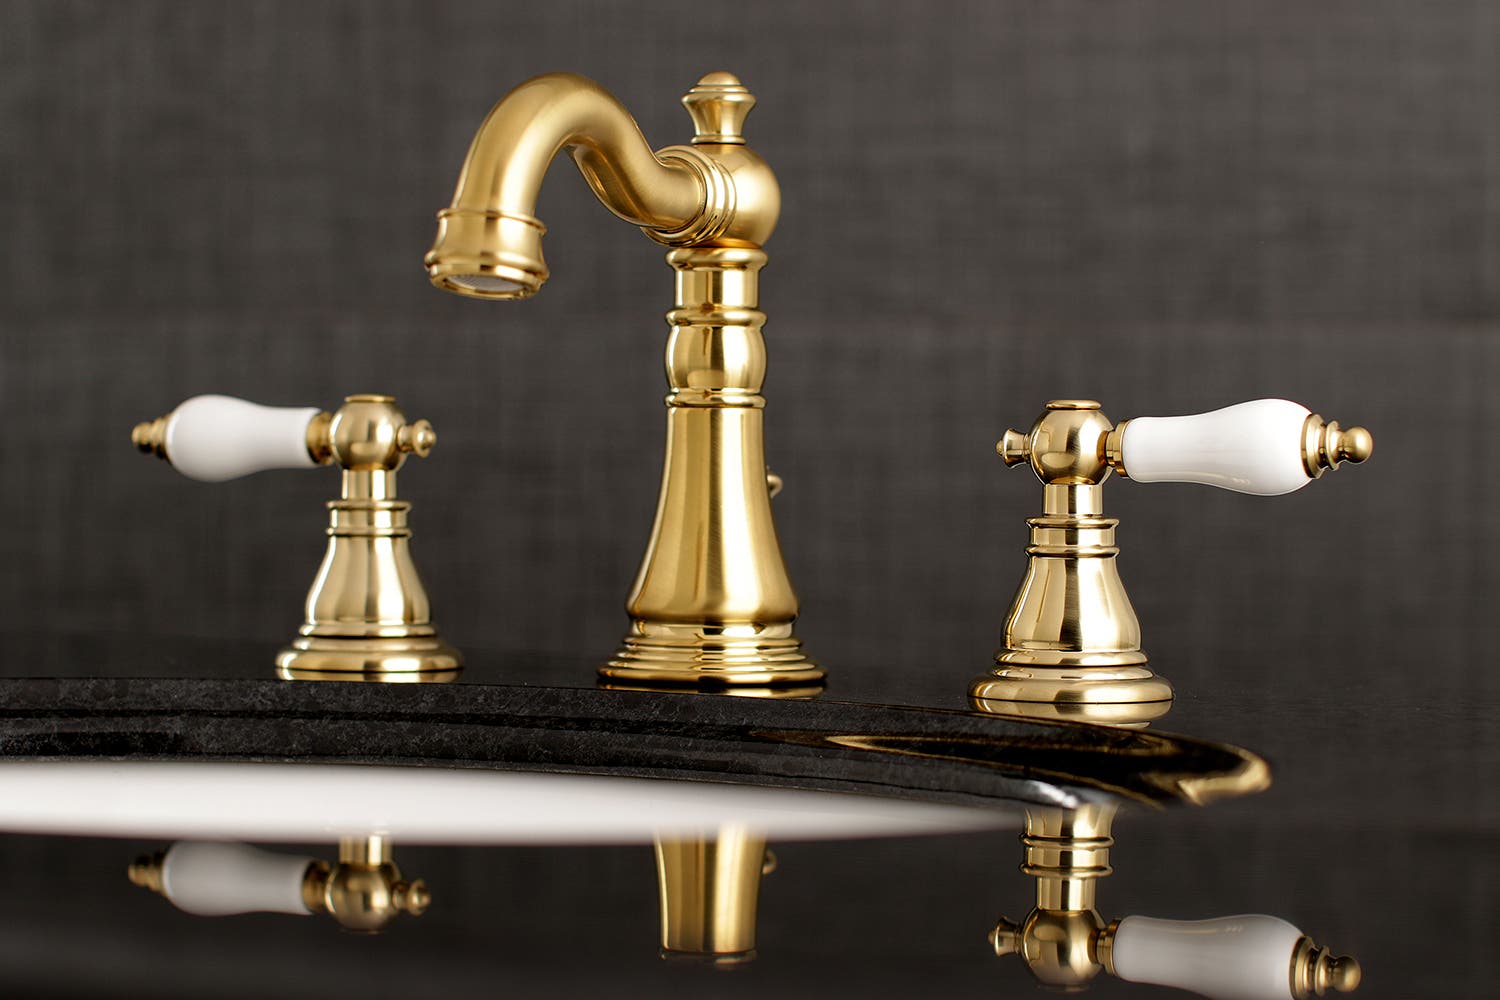 This Just In: Vintage is in and so is the Fauceture Lavatory Faucet, FSC1973APL